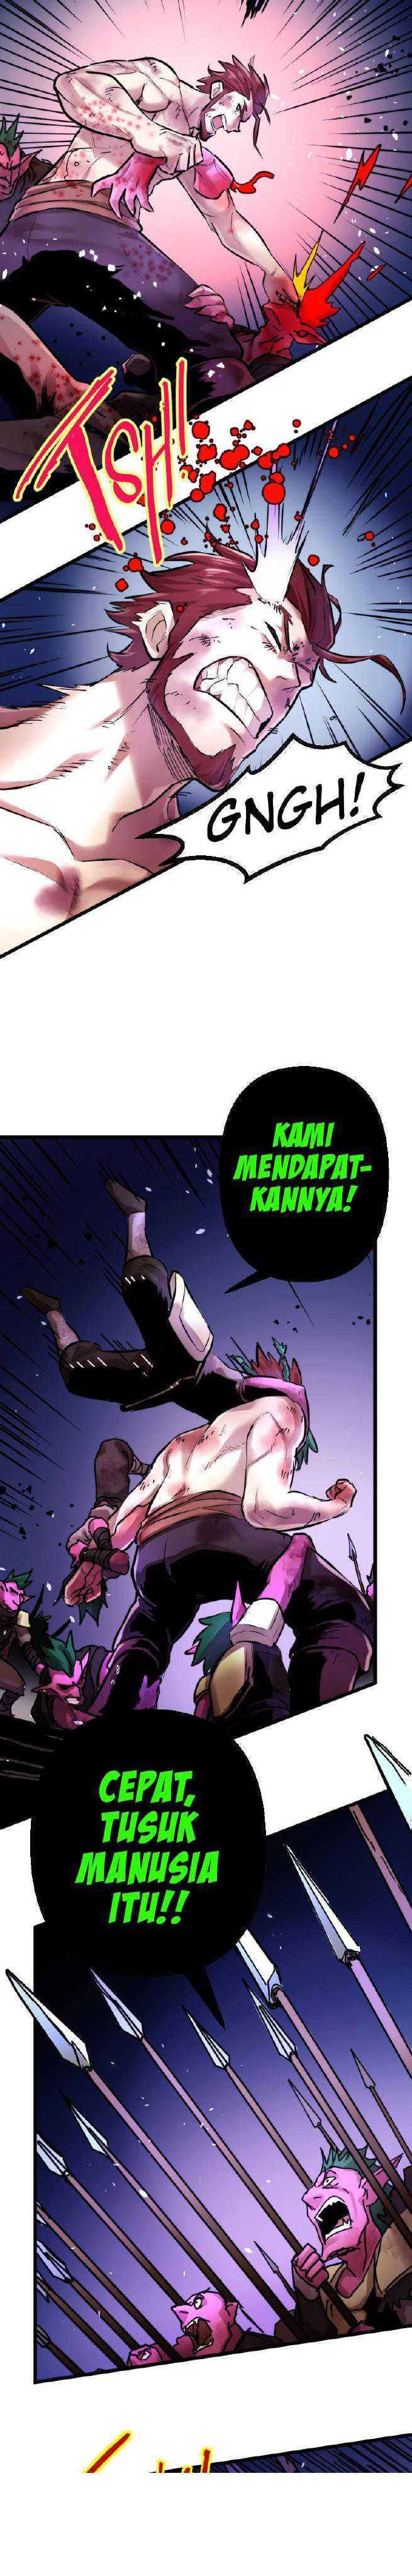 DevilUp Chapter 08